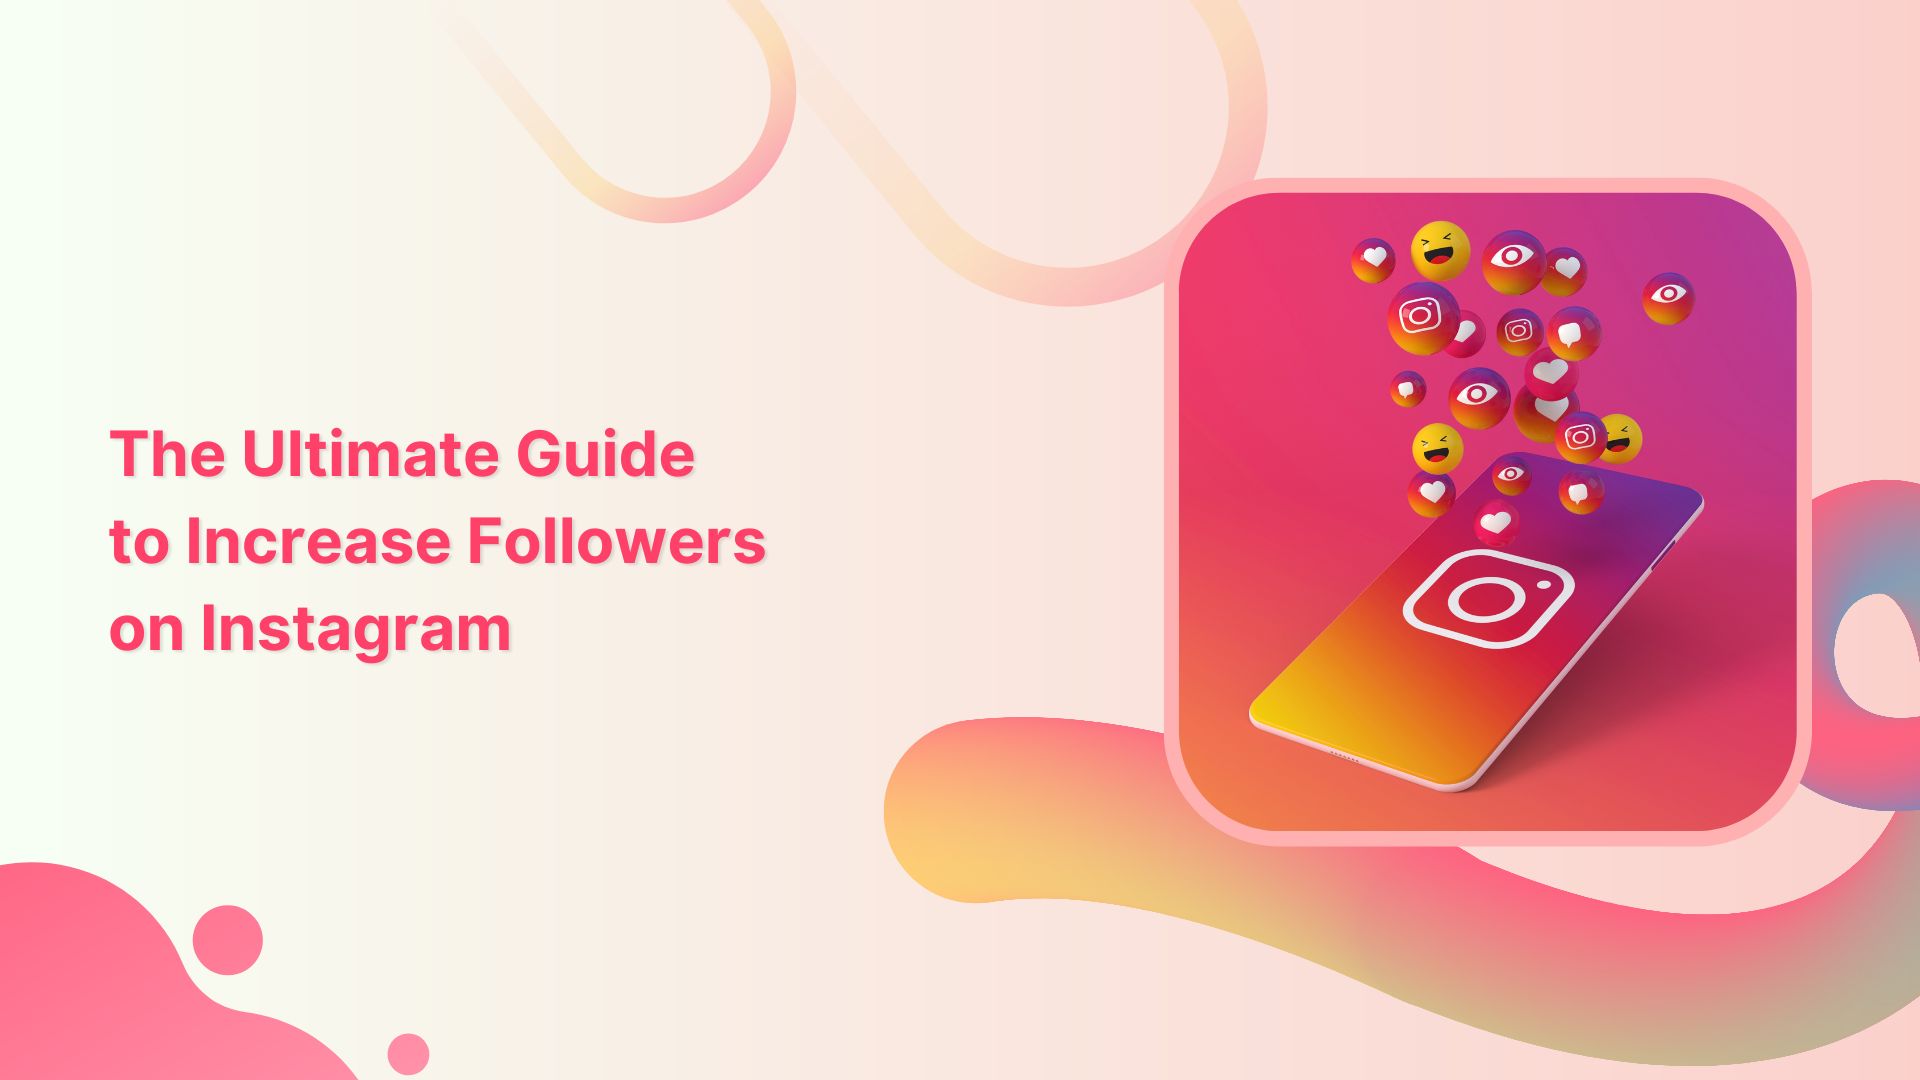 The Ultimate Guide to Increase Followers on Instagram